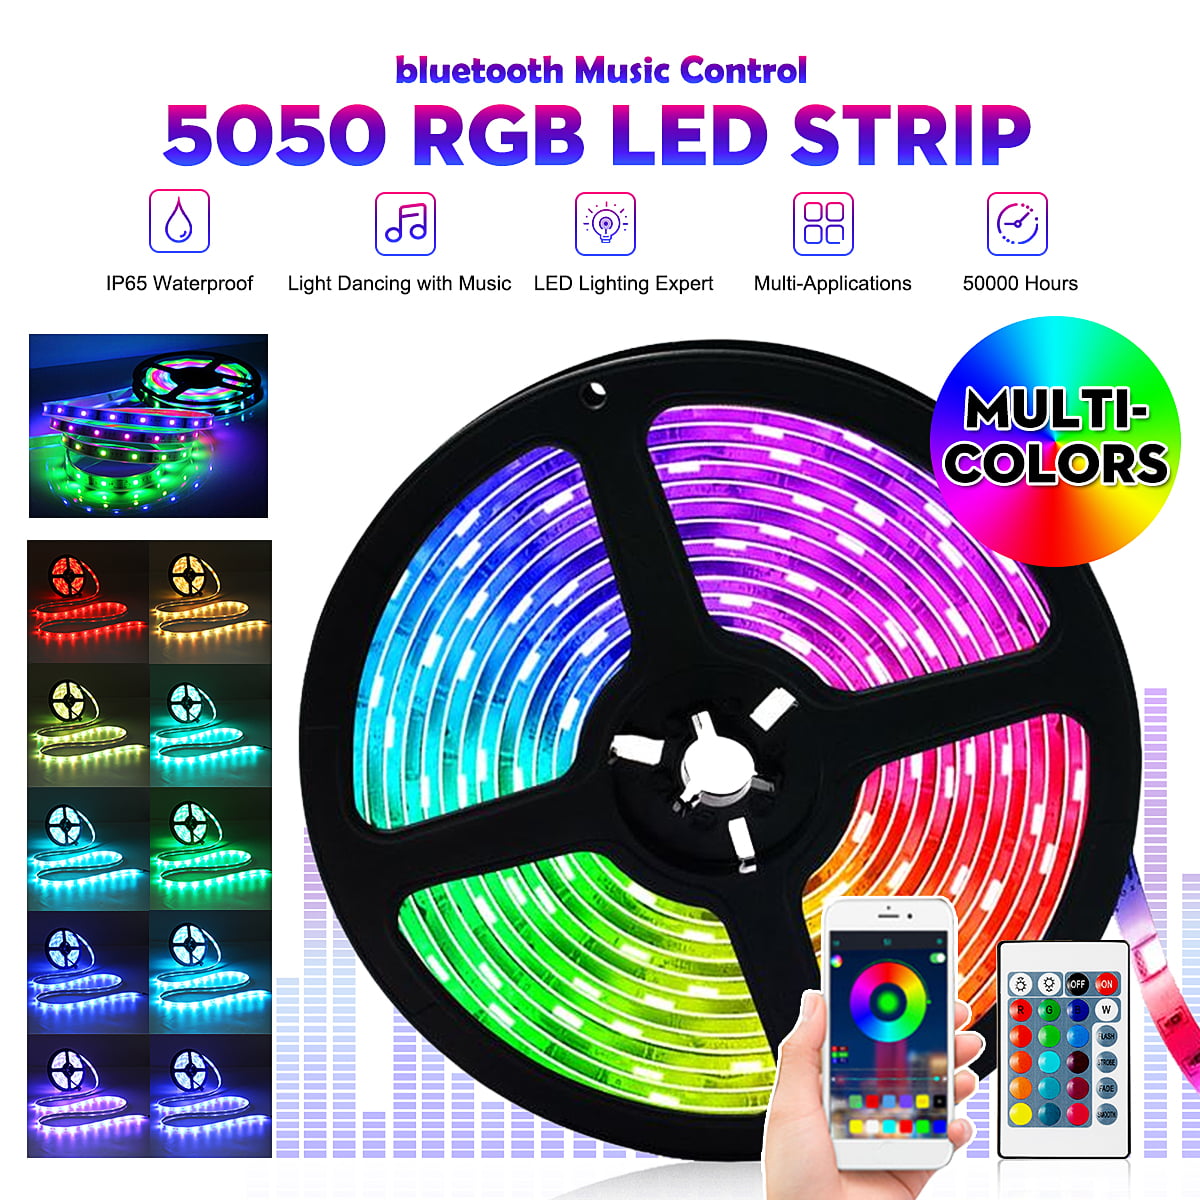 WIFI LED Strip 10M 16 Million Colors Google Home 2x150 Sync with Music 2x5M Work with Alexa Smart Phone APP Controlled LED Band ALED LIGHT RGB LED Strips Lights 5050 SMD 300 IP65 Waterproof